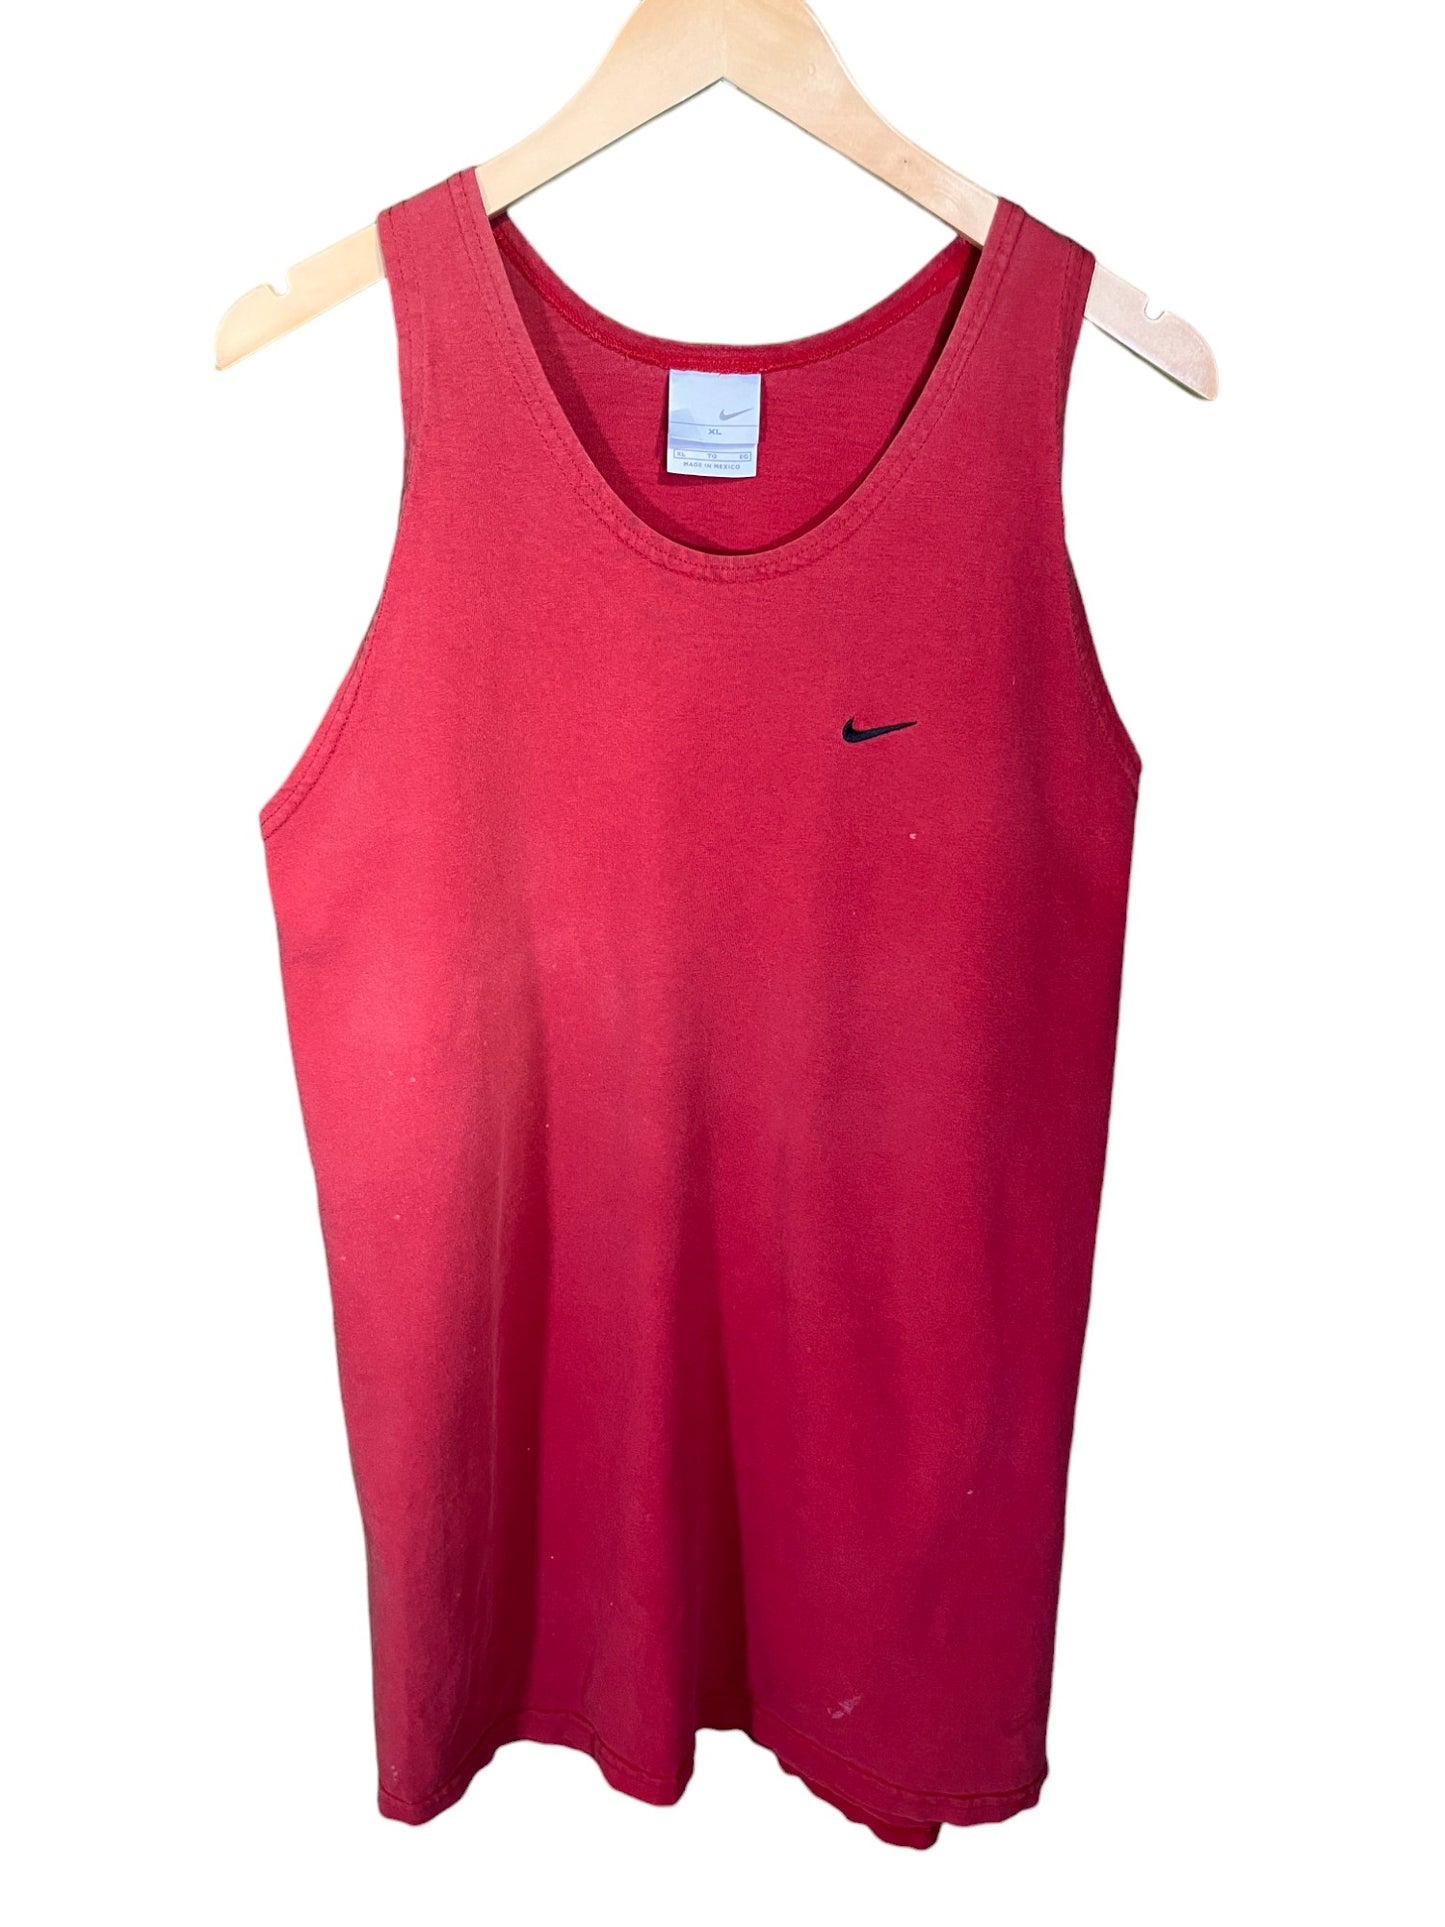 Vintage 00's Nike Small Swoosh Red Tank Top Size XL